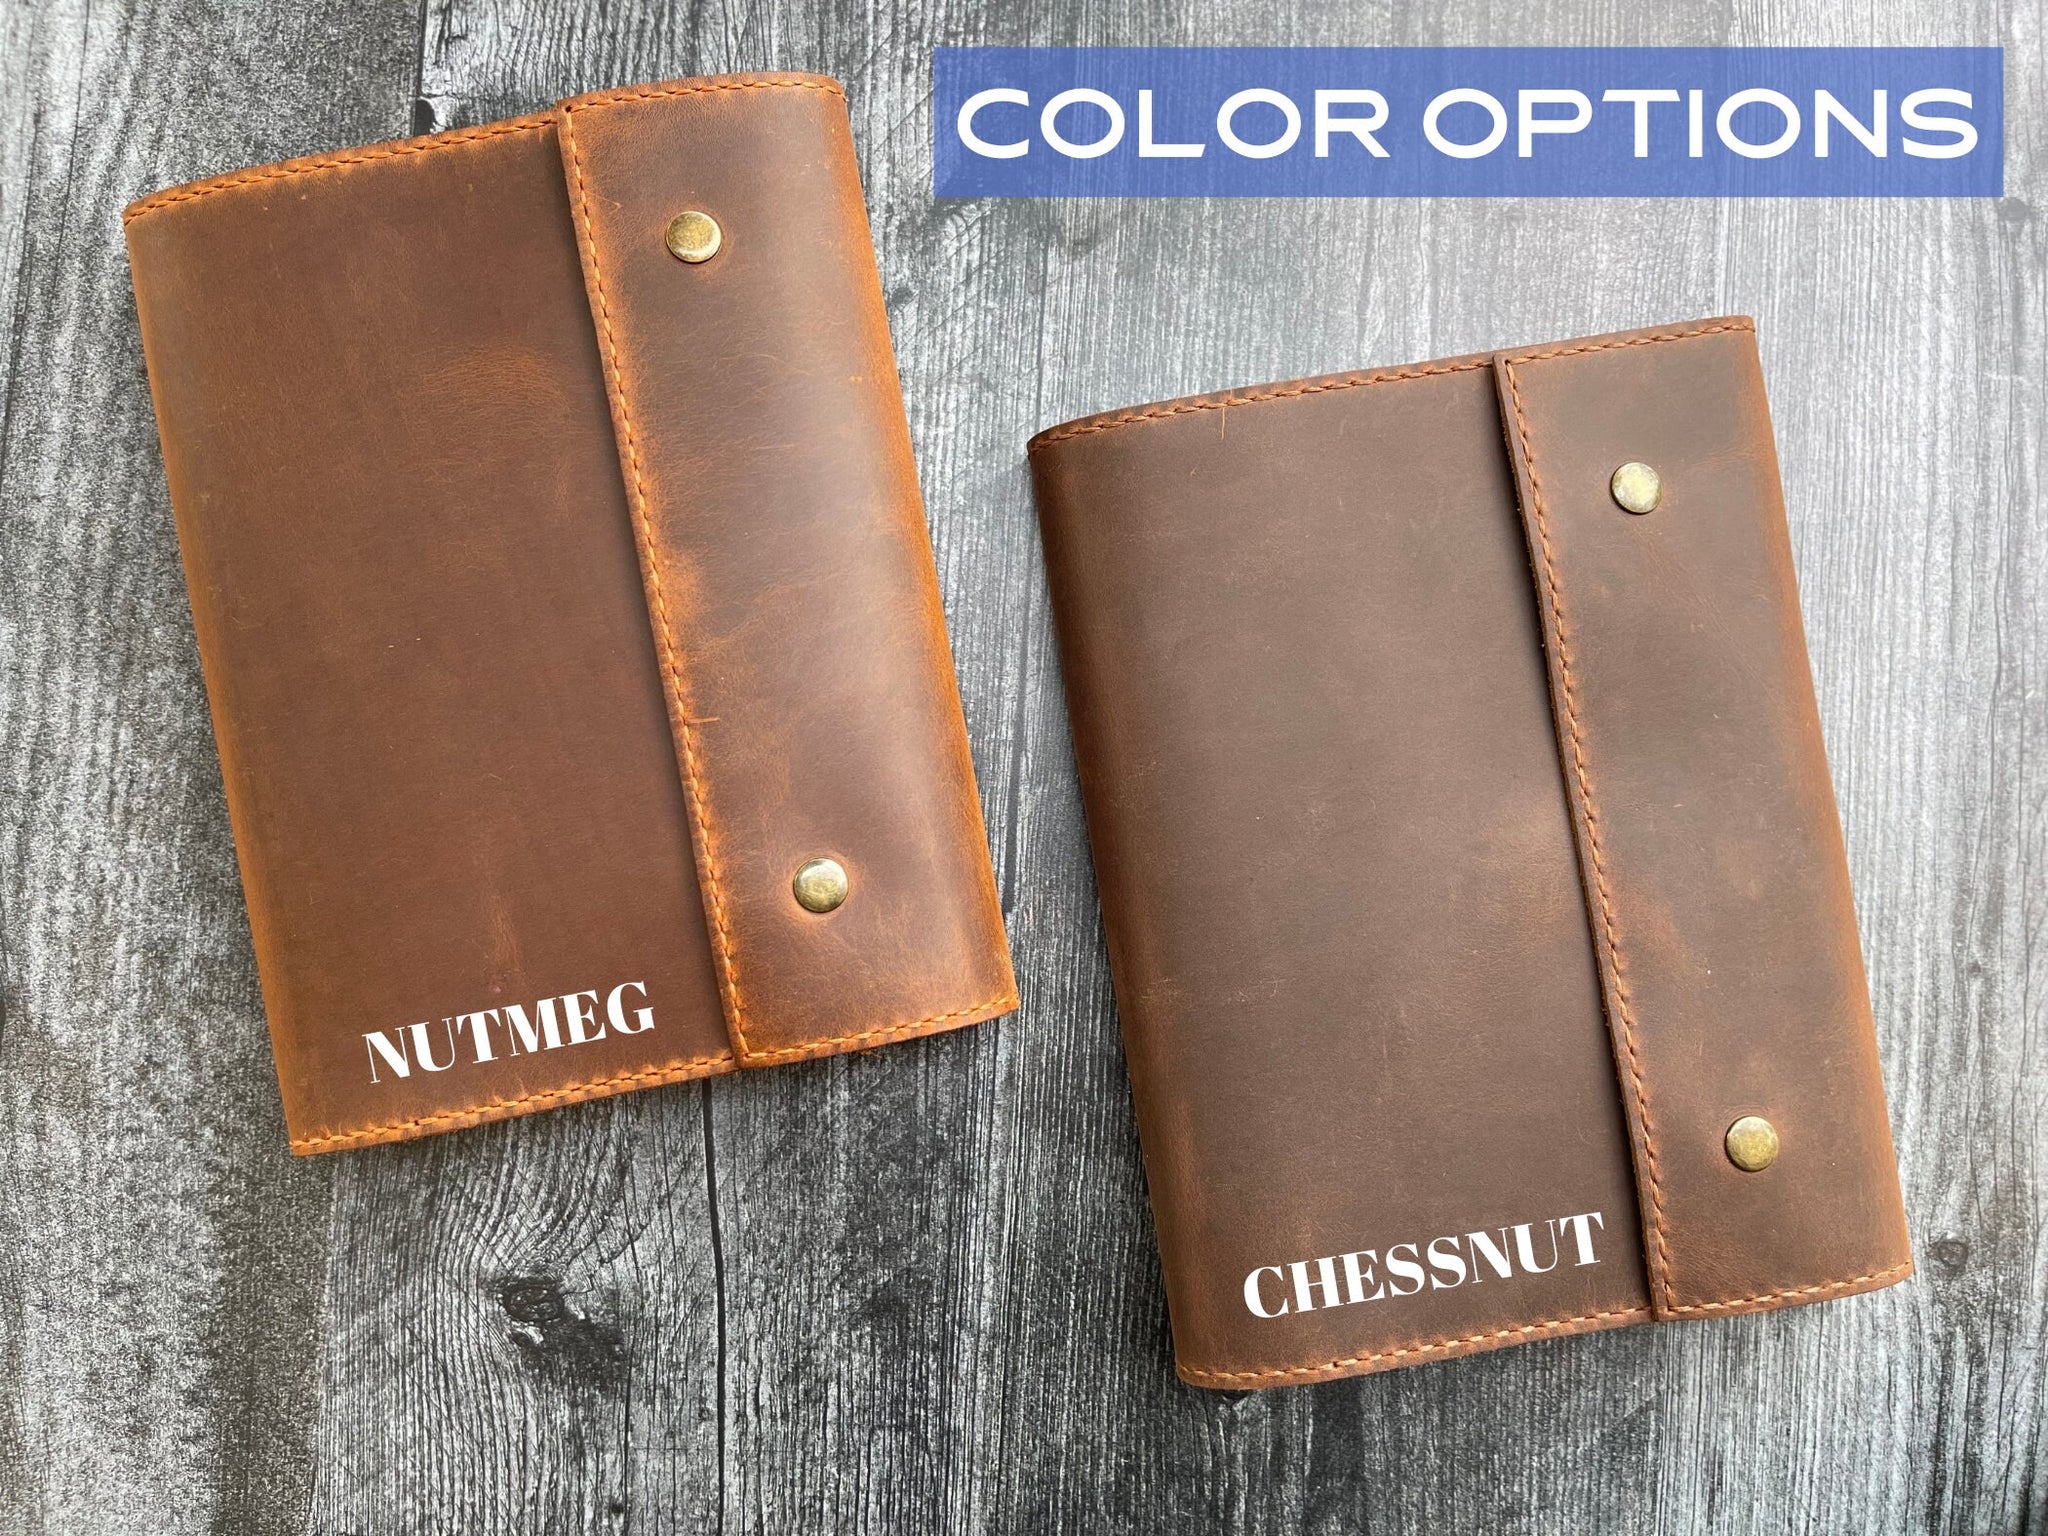 Personalized Leather Journal, A5 size Refillable Leather Cover, Bullet Journal with Journal, Travel Notebook,